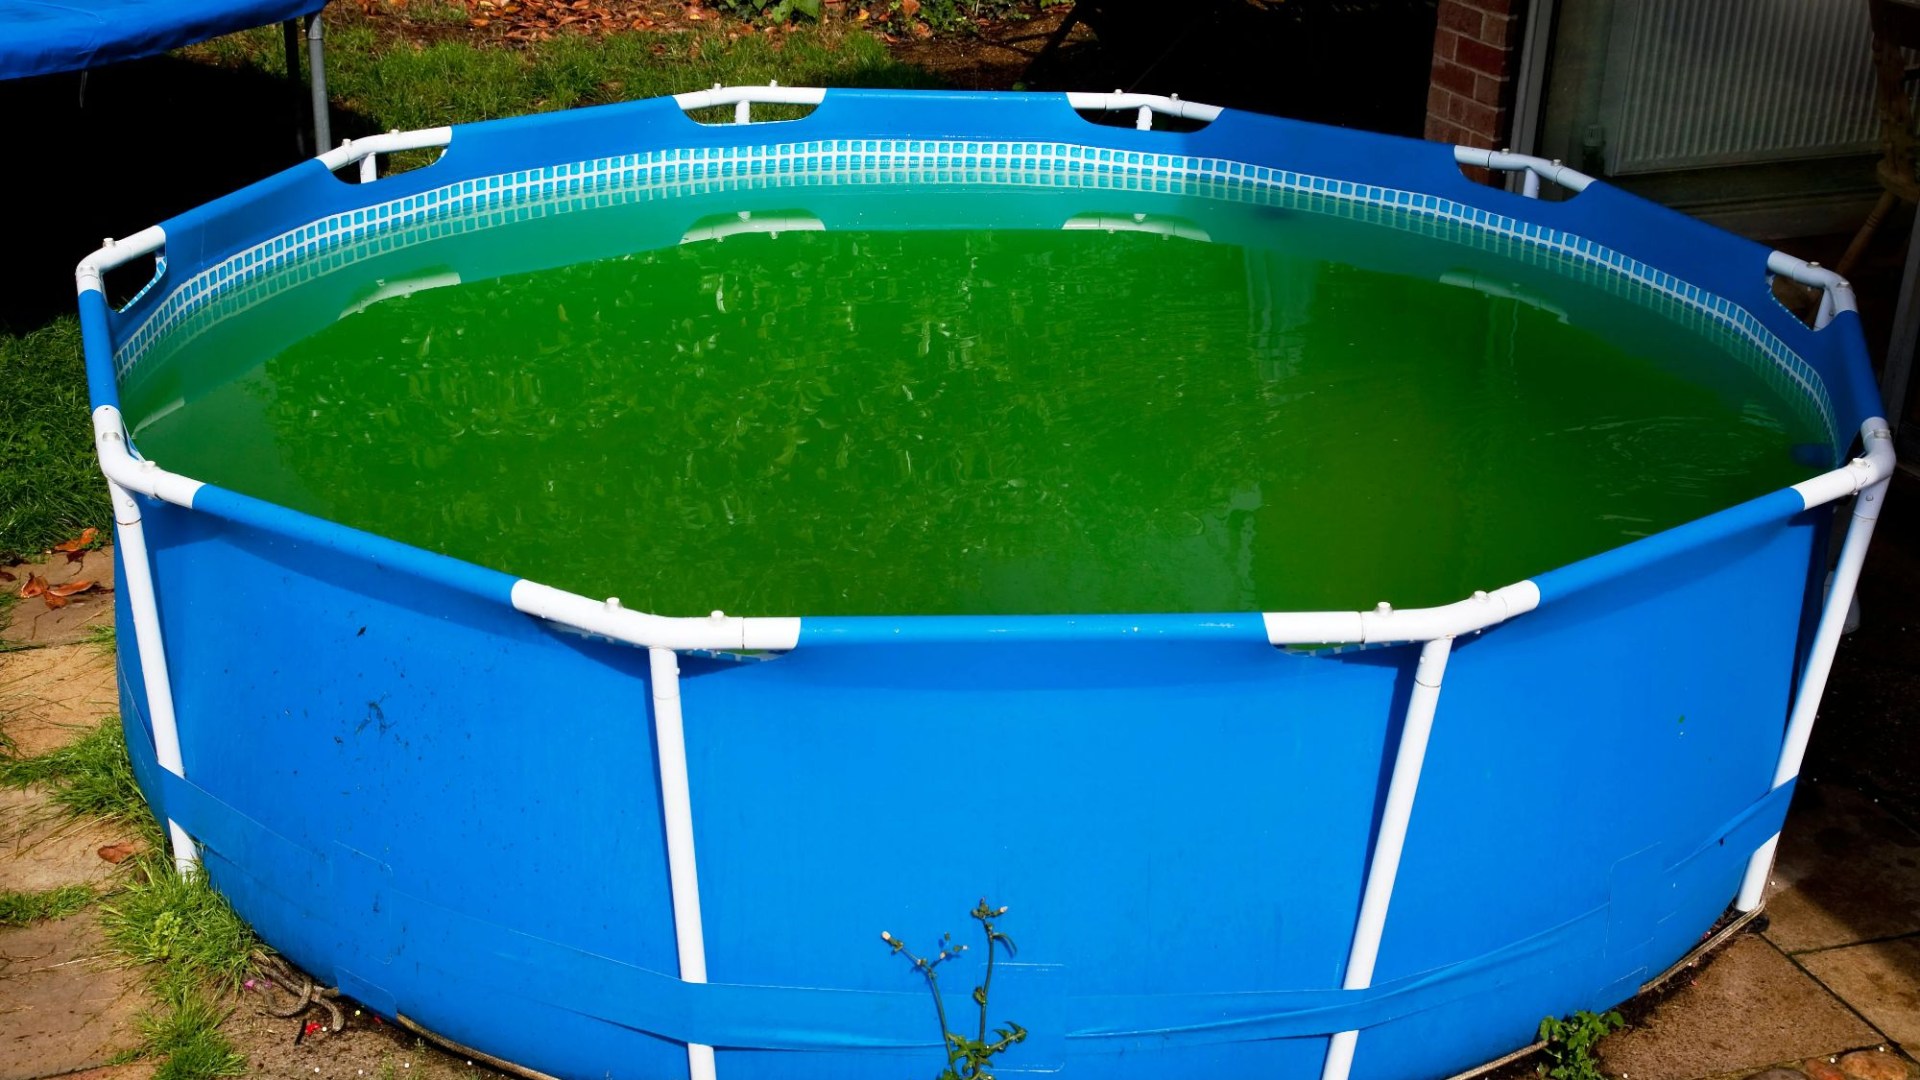 ‘It’s almost like new’ people rave over 1.39 B&M bargain that’ll help get your grubby paddling pool clean in an instant [Video]